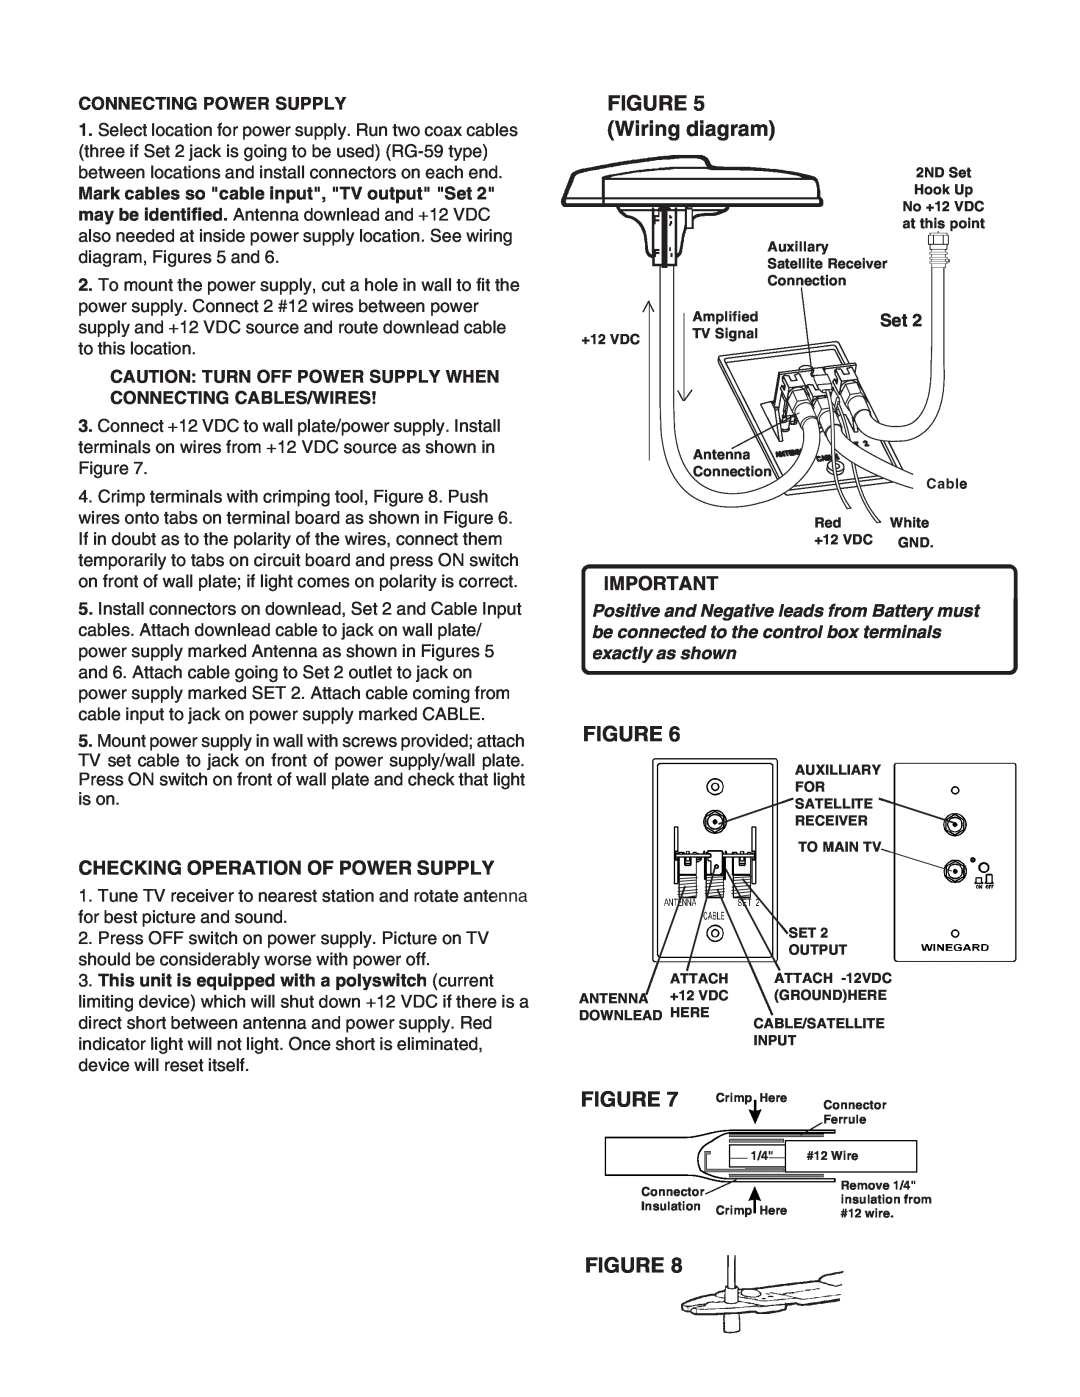 Winegard RS-1500 manual Wiring diagram, Checking Operation Of Power Supply, Connecting Power Supply 